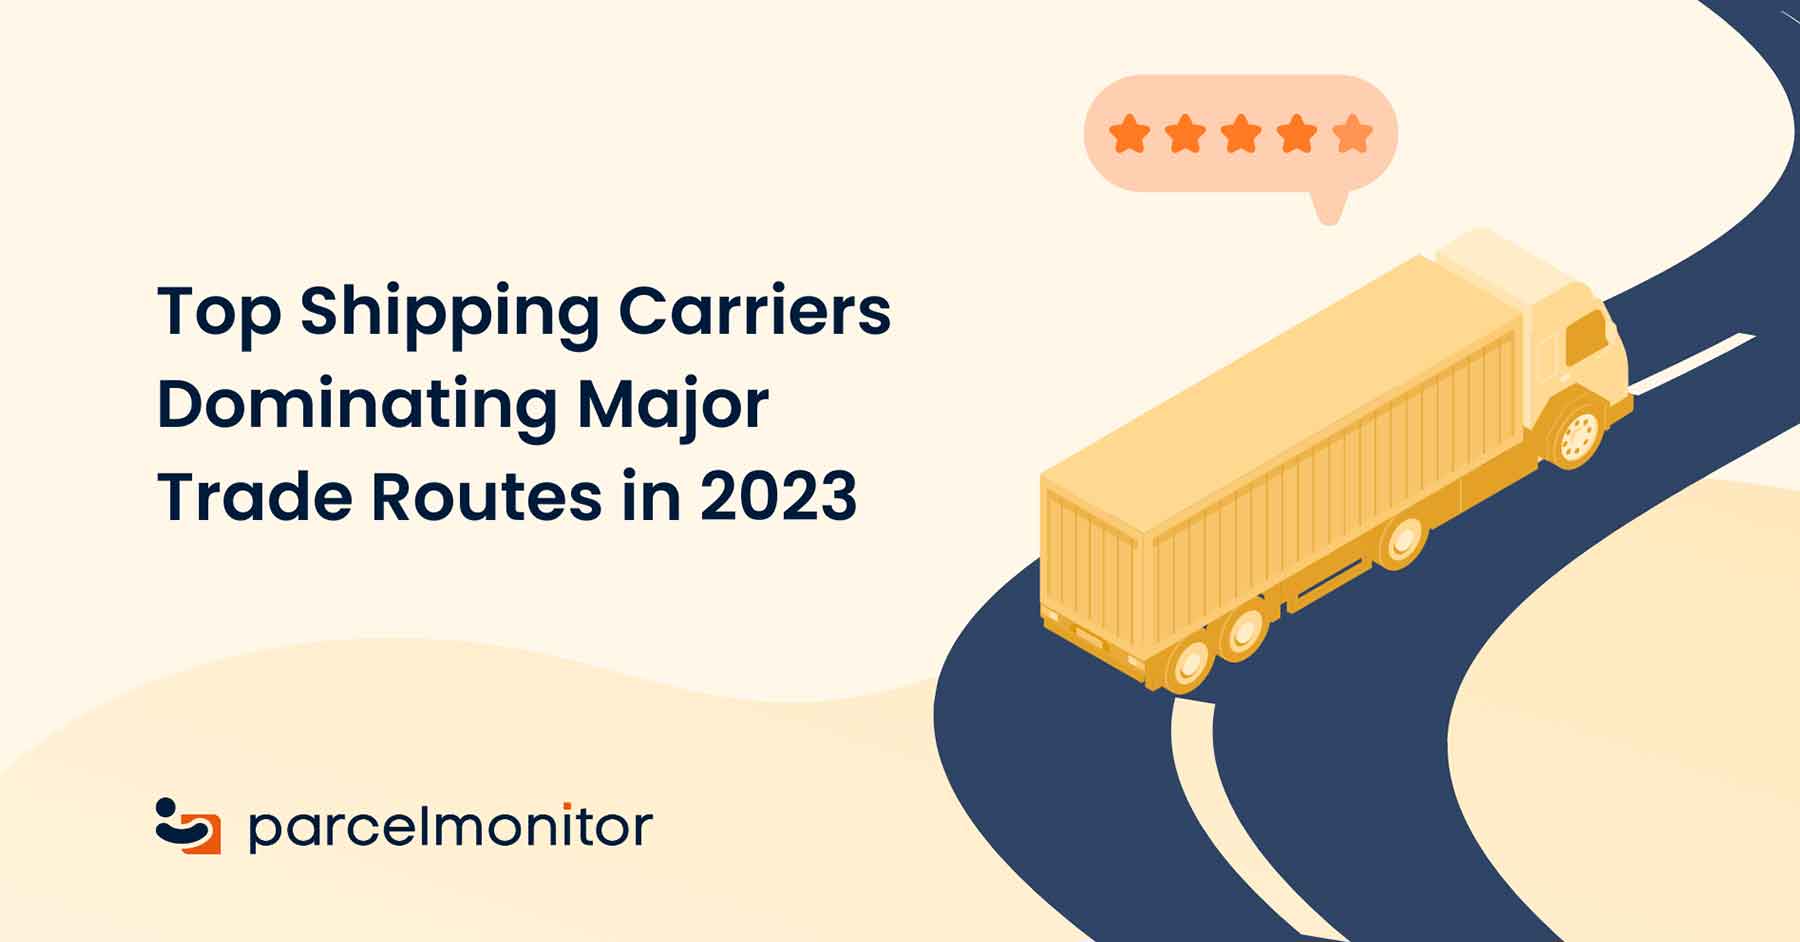 Top Shipping Carriers Dominating Major Trade Routes in 2023 Featured Image